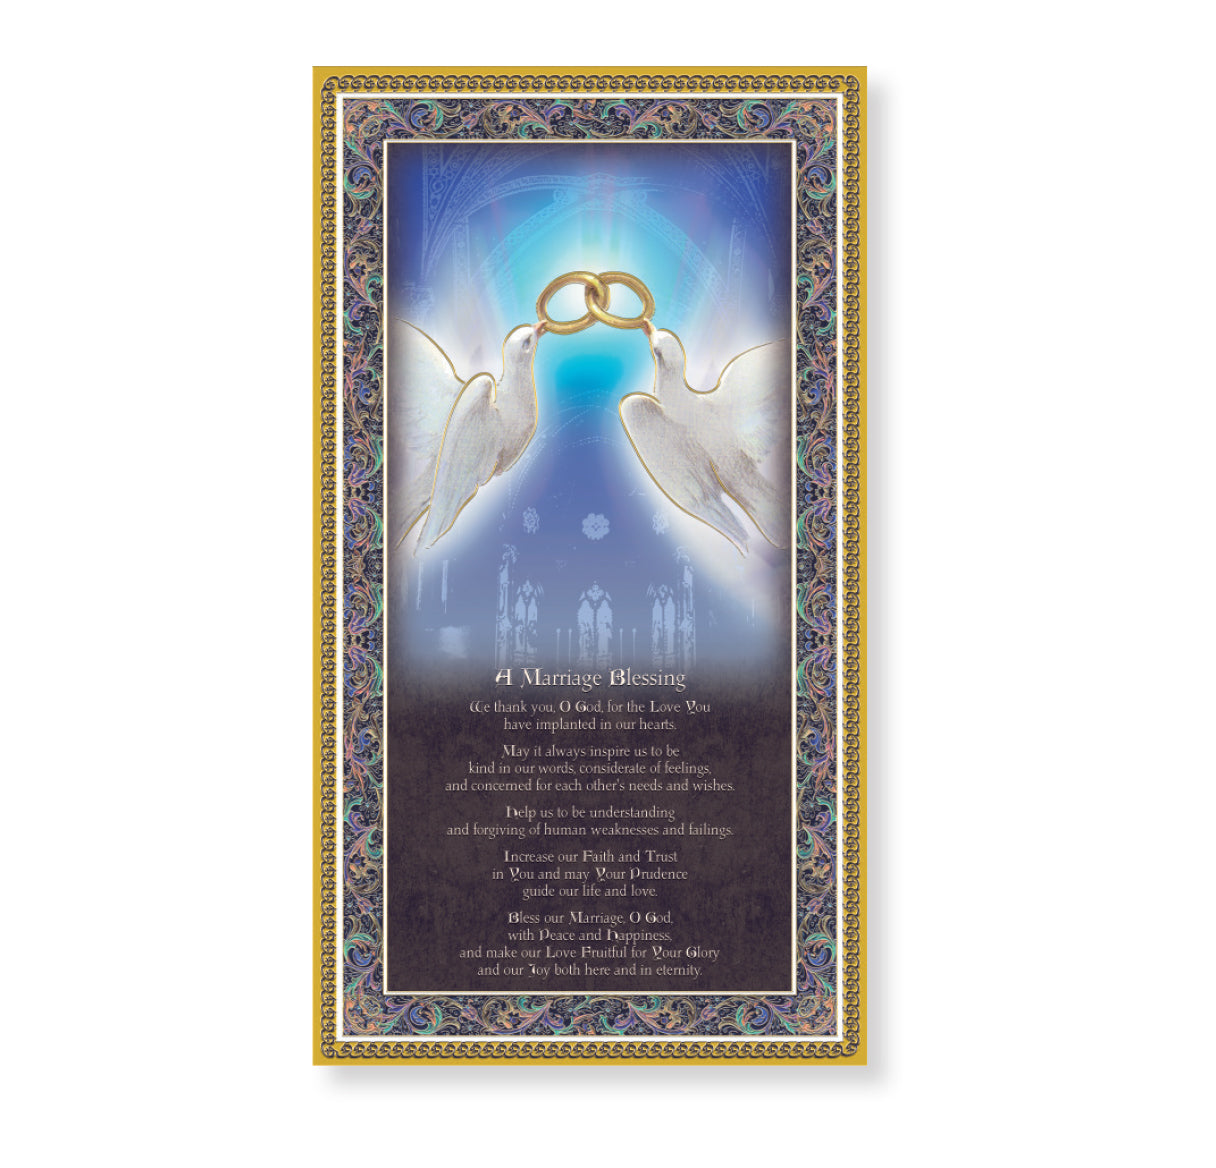 Marriage Blessing Gold Foil Wood Plaque